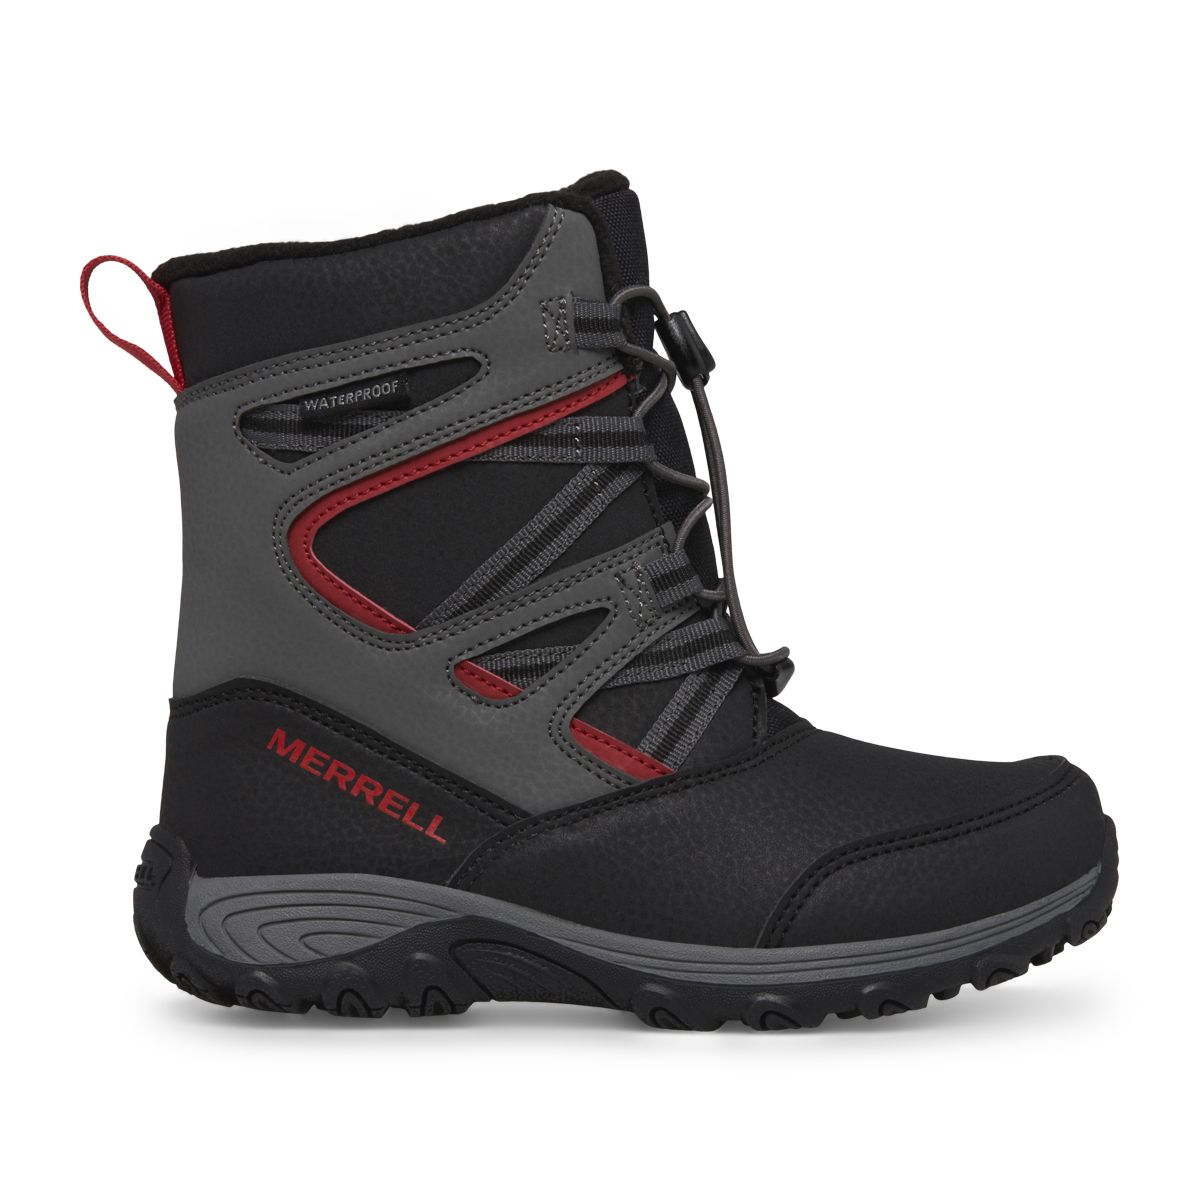 Outback Snow Boot 2.0 Waterproof, Grey/Black/Red, dynamic 1